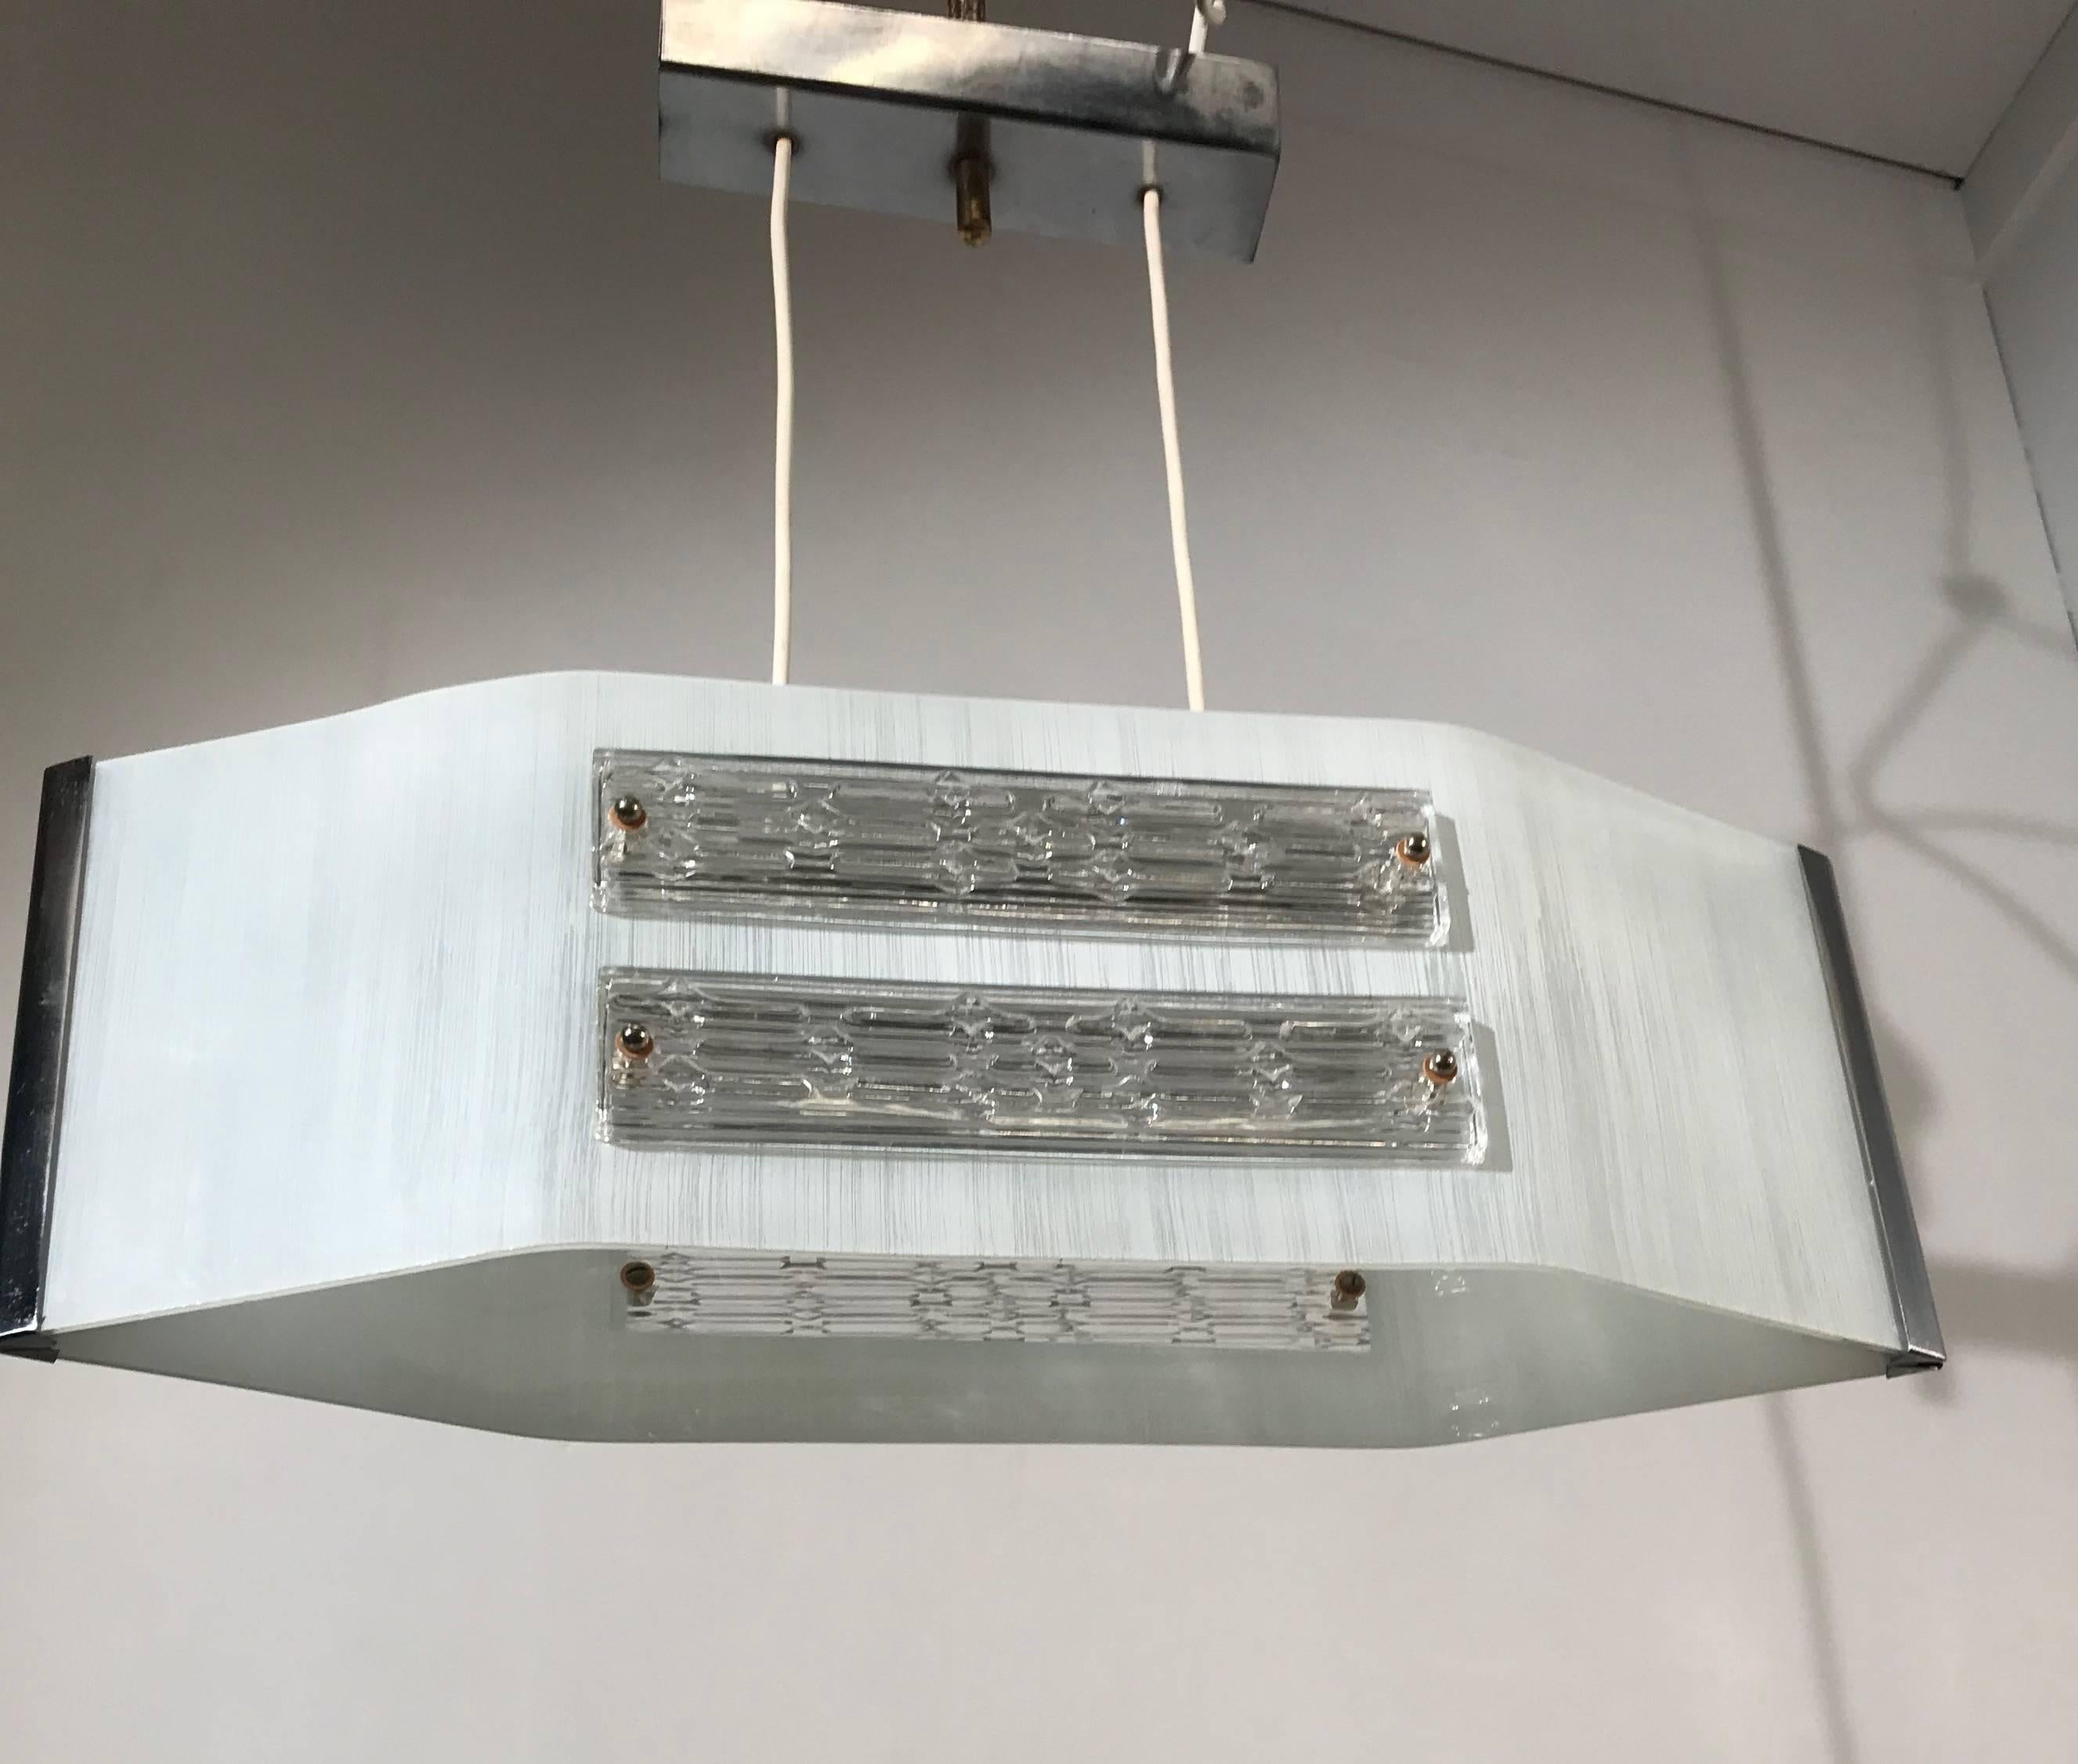 Incredibly cool Modernist light fixture.

The overal design of this 1960's light fixture is second to none. Unfortunately we don't know who the designer is, but anyone with an eye for avantgardistic and top-of-the-line light fixtures will see the